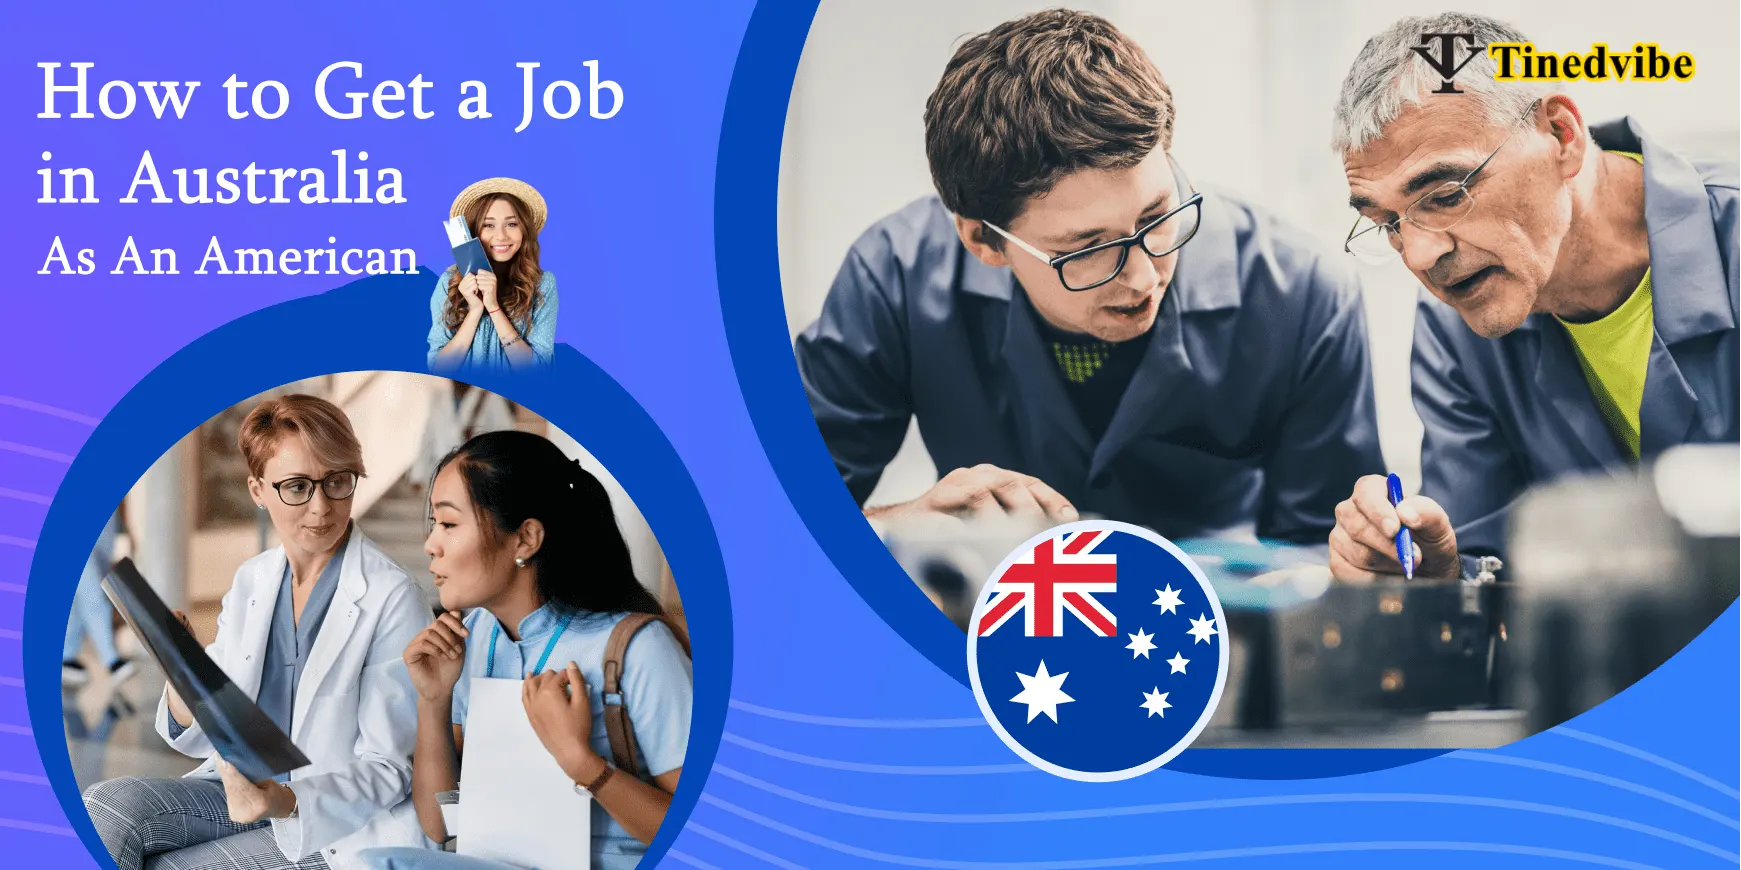 How to Get a Job in Australia As An American